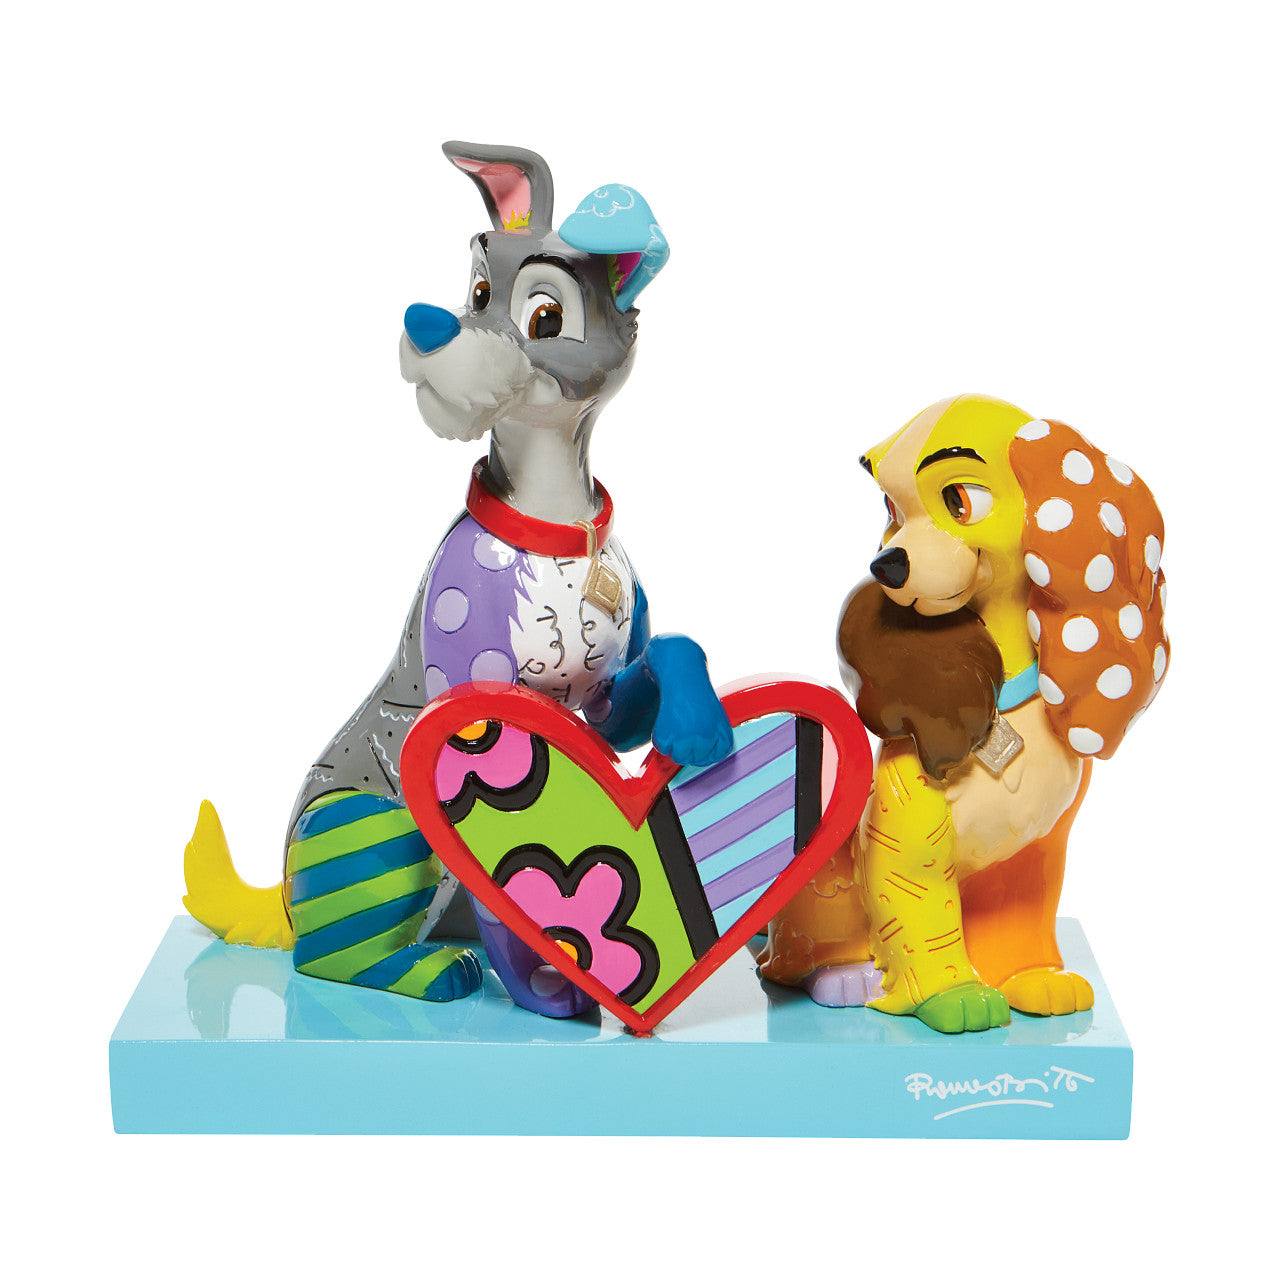 Lady and the Tramp Numbered Limited Edition Figurine